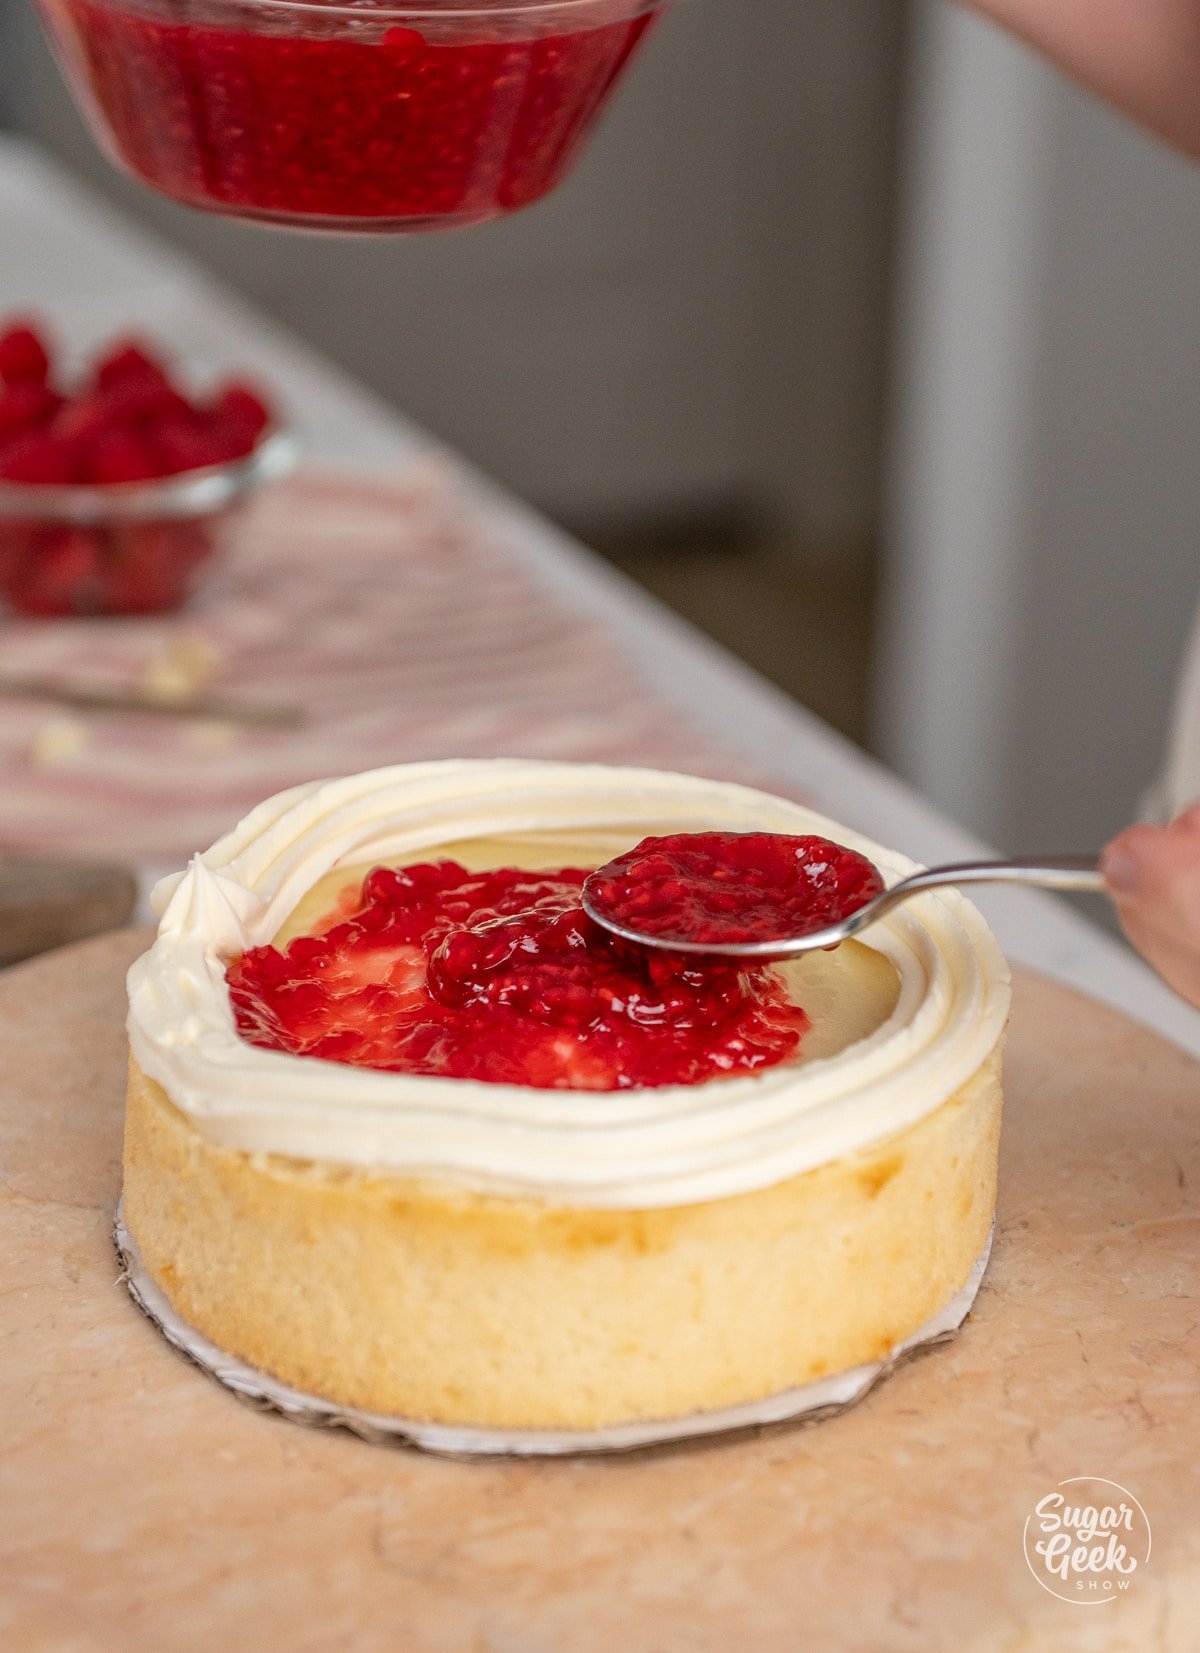 spoon spreading raspberry filling on a cake layer